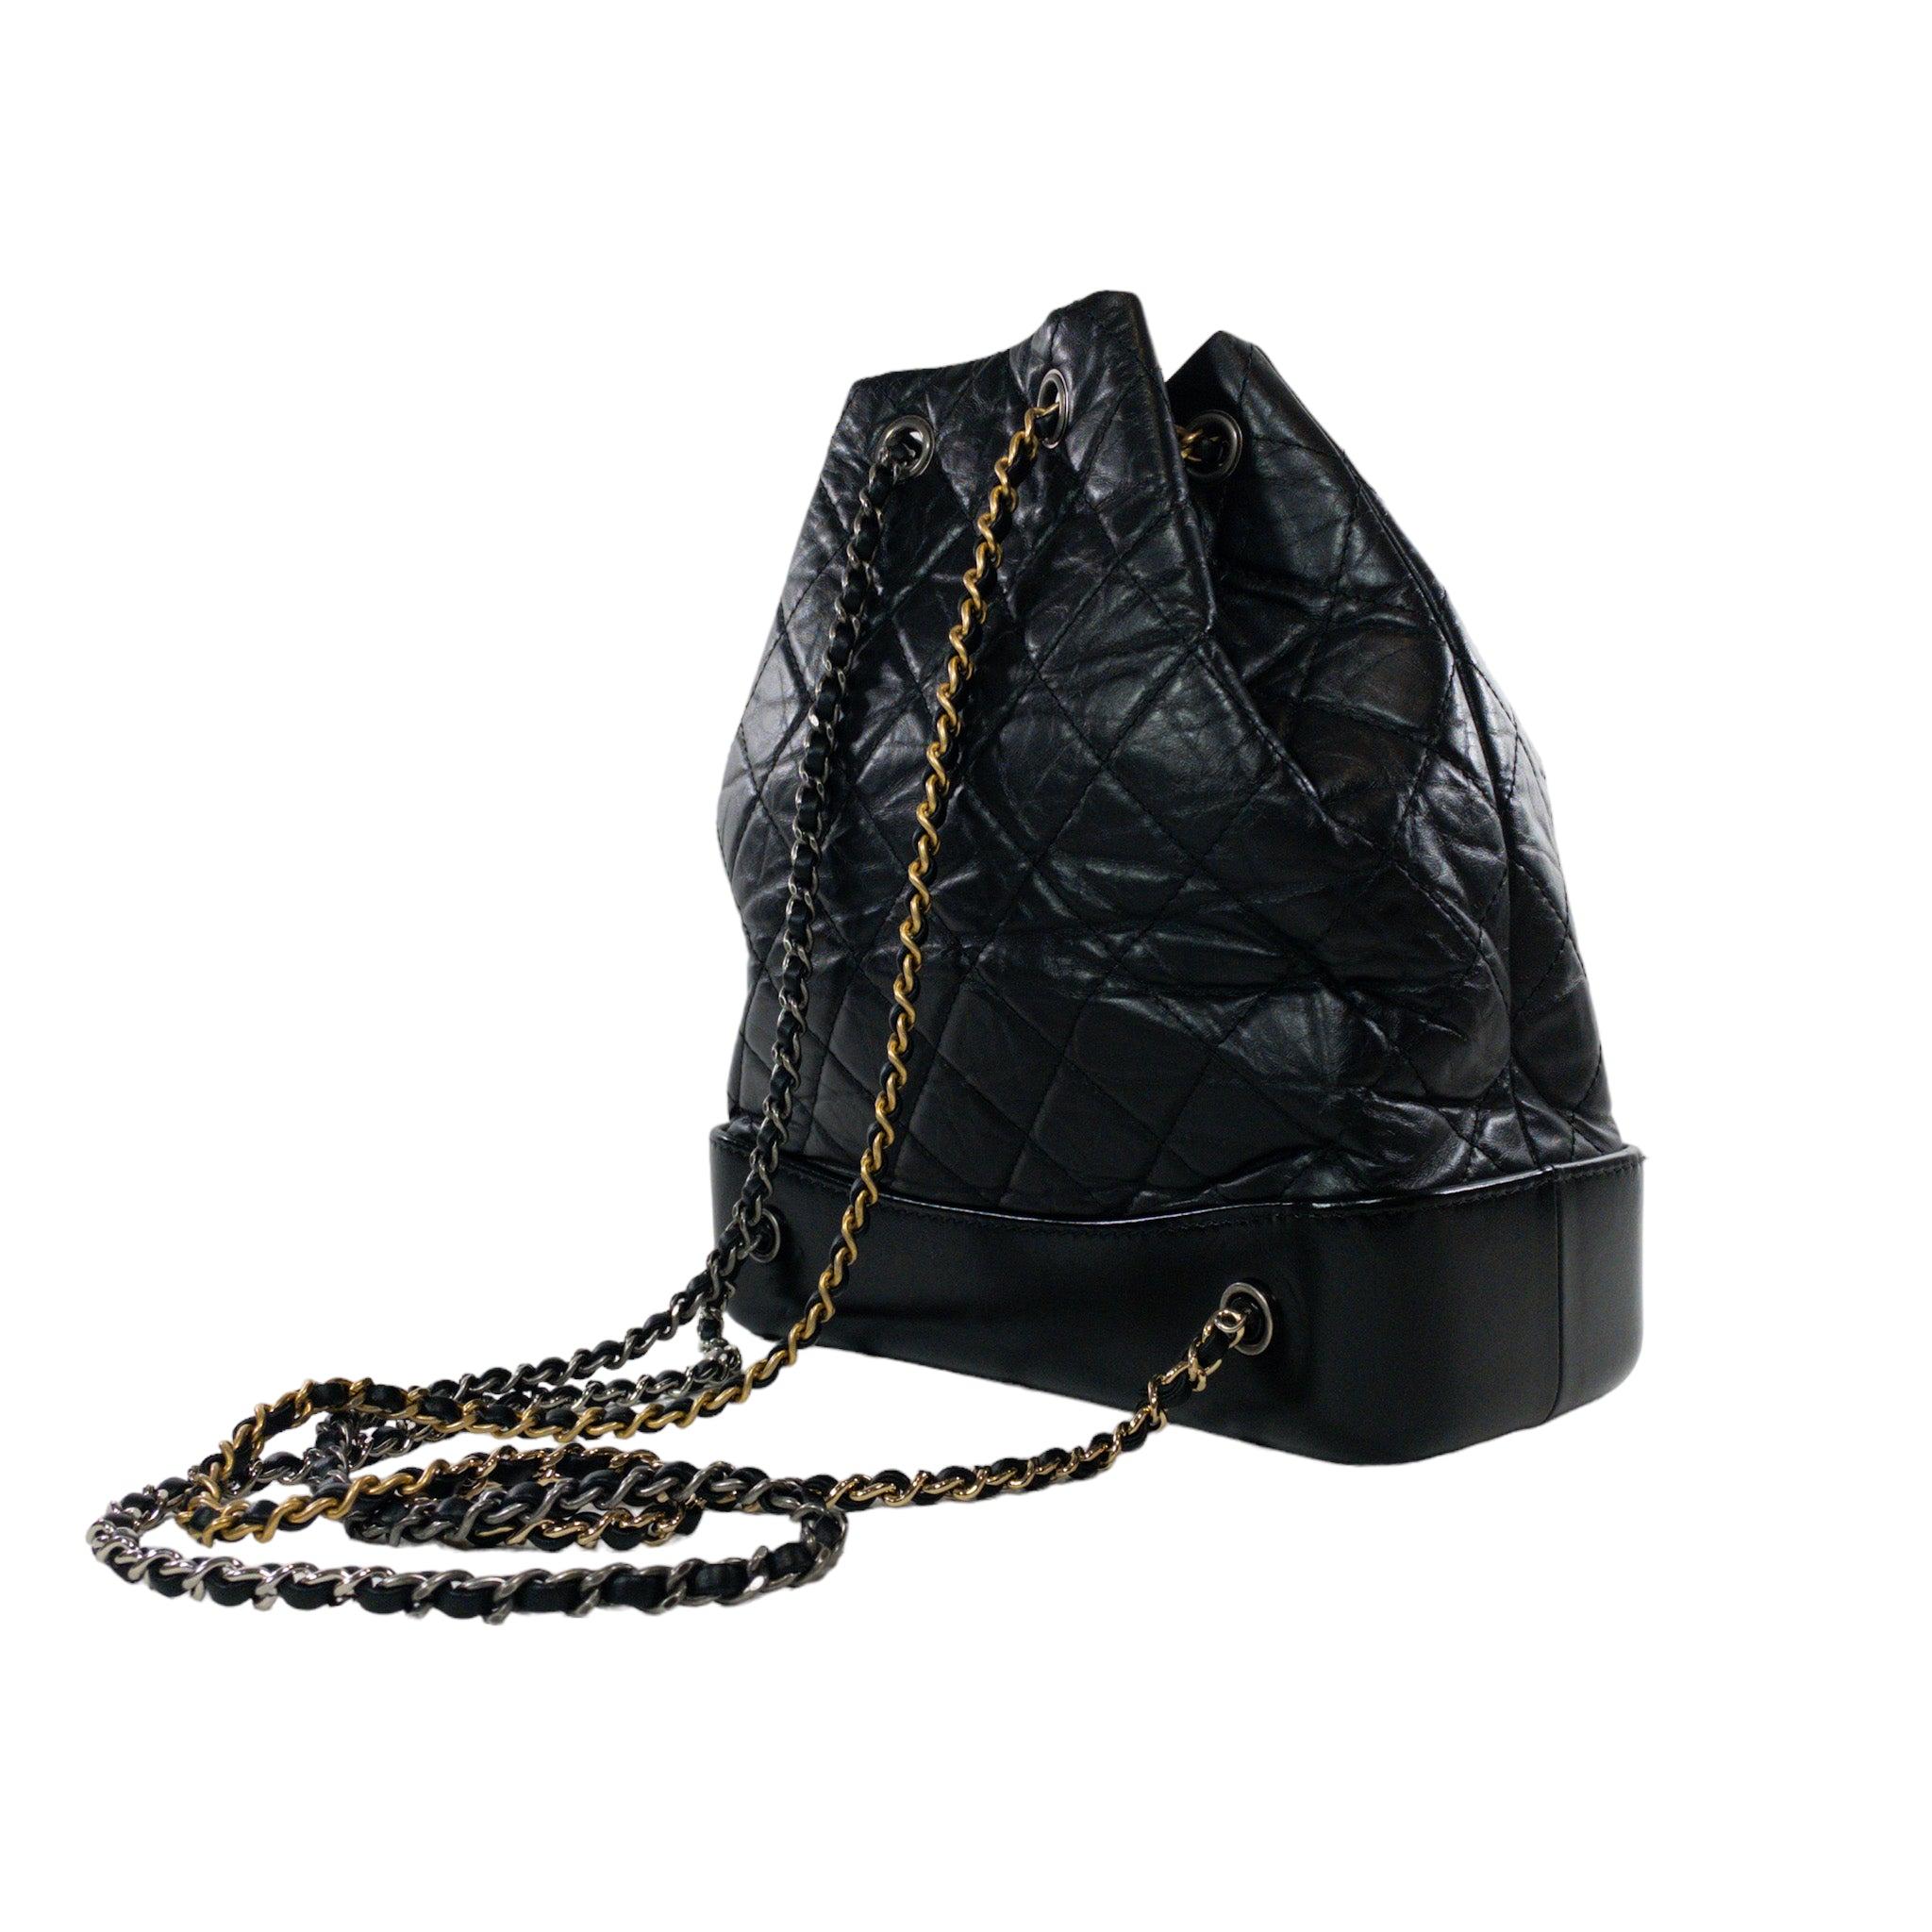 Chanel Small Black Gabrielle Backpack

This is an authentic Chanel Gabrielle small drawstring backpack. Black quilted leather with glazed structured base. Multicolor woven chain hardware. Ruthenium CC in front. Lined with red fabric. 

Additional